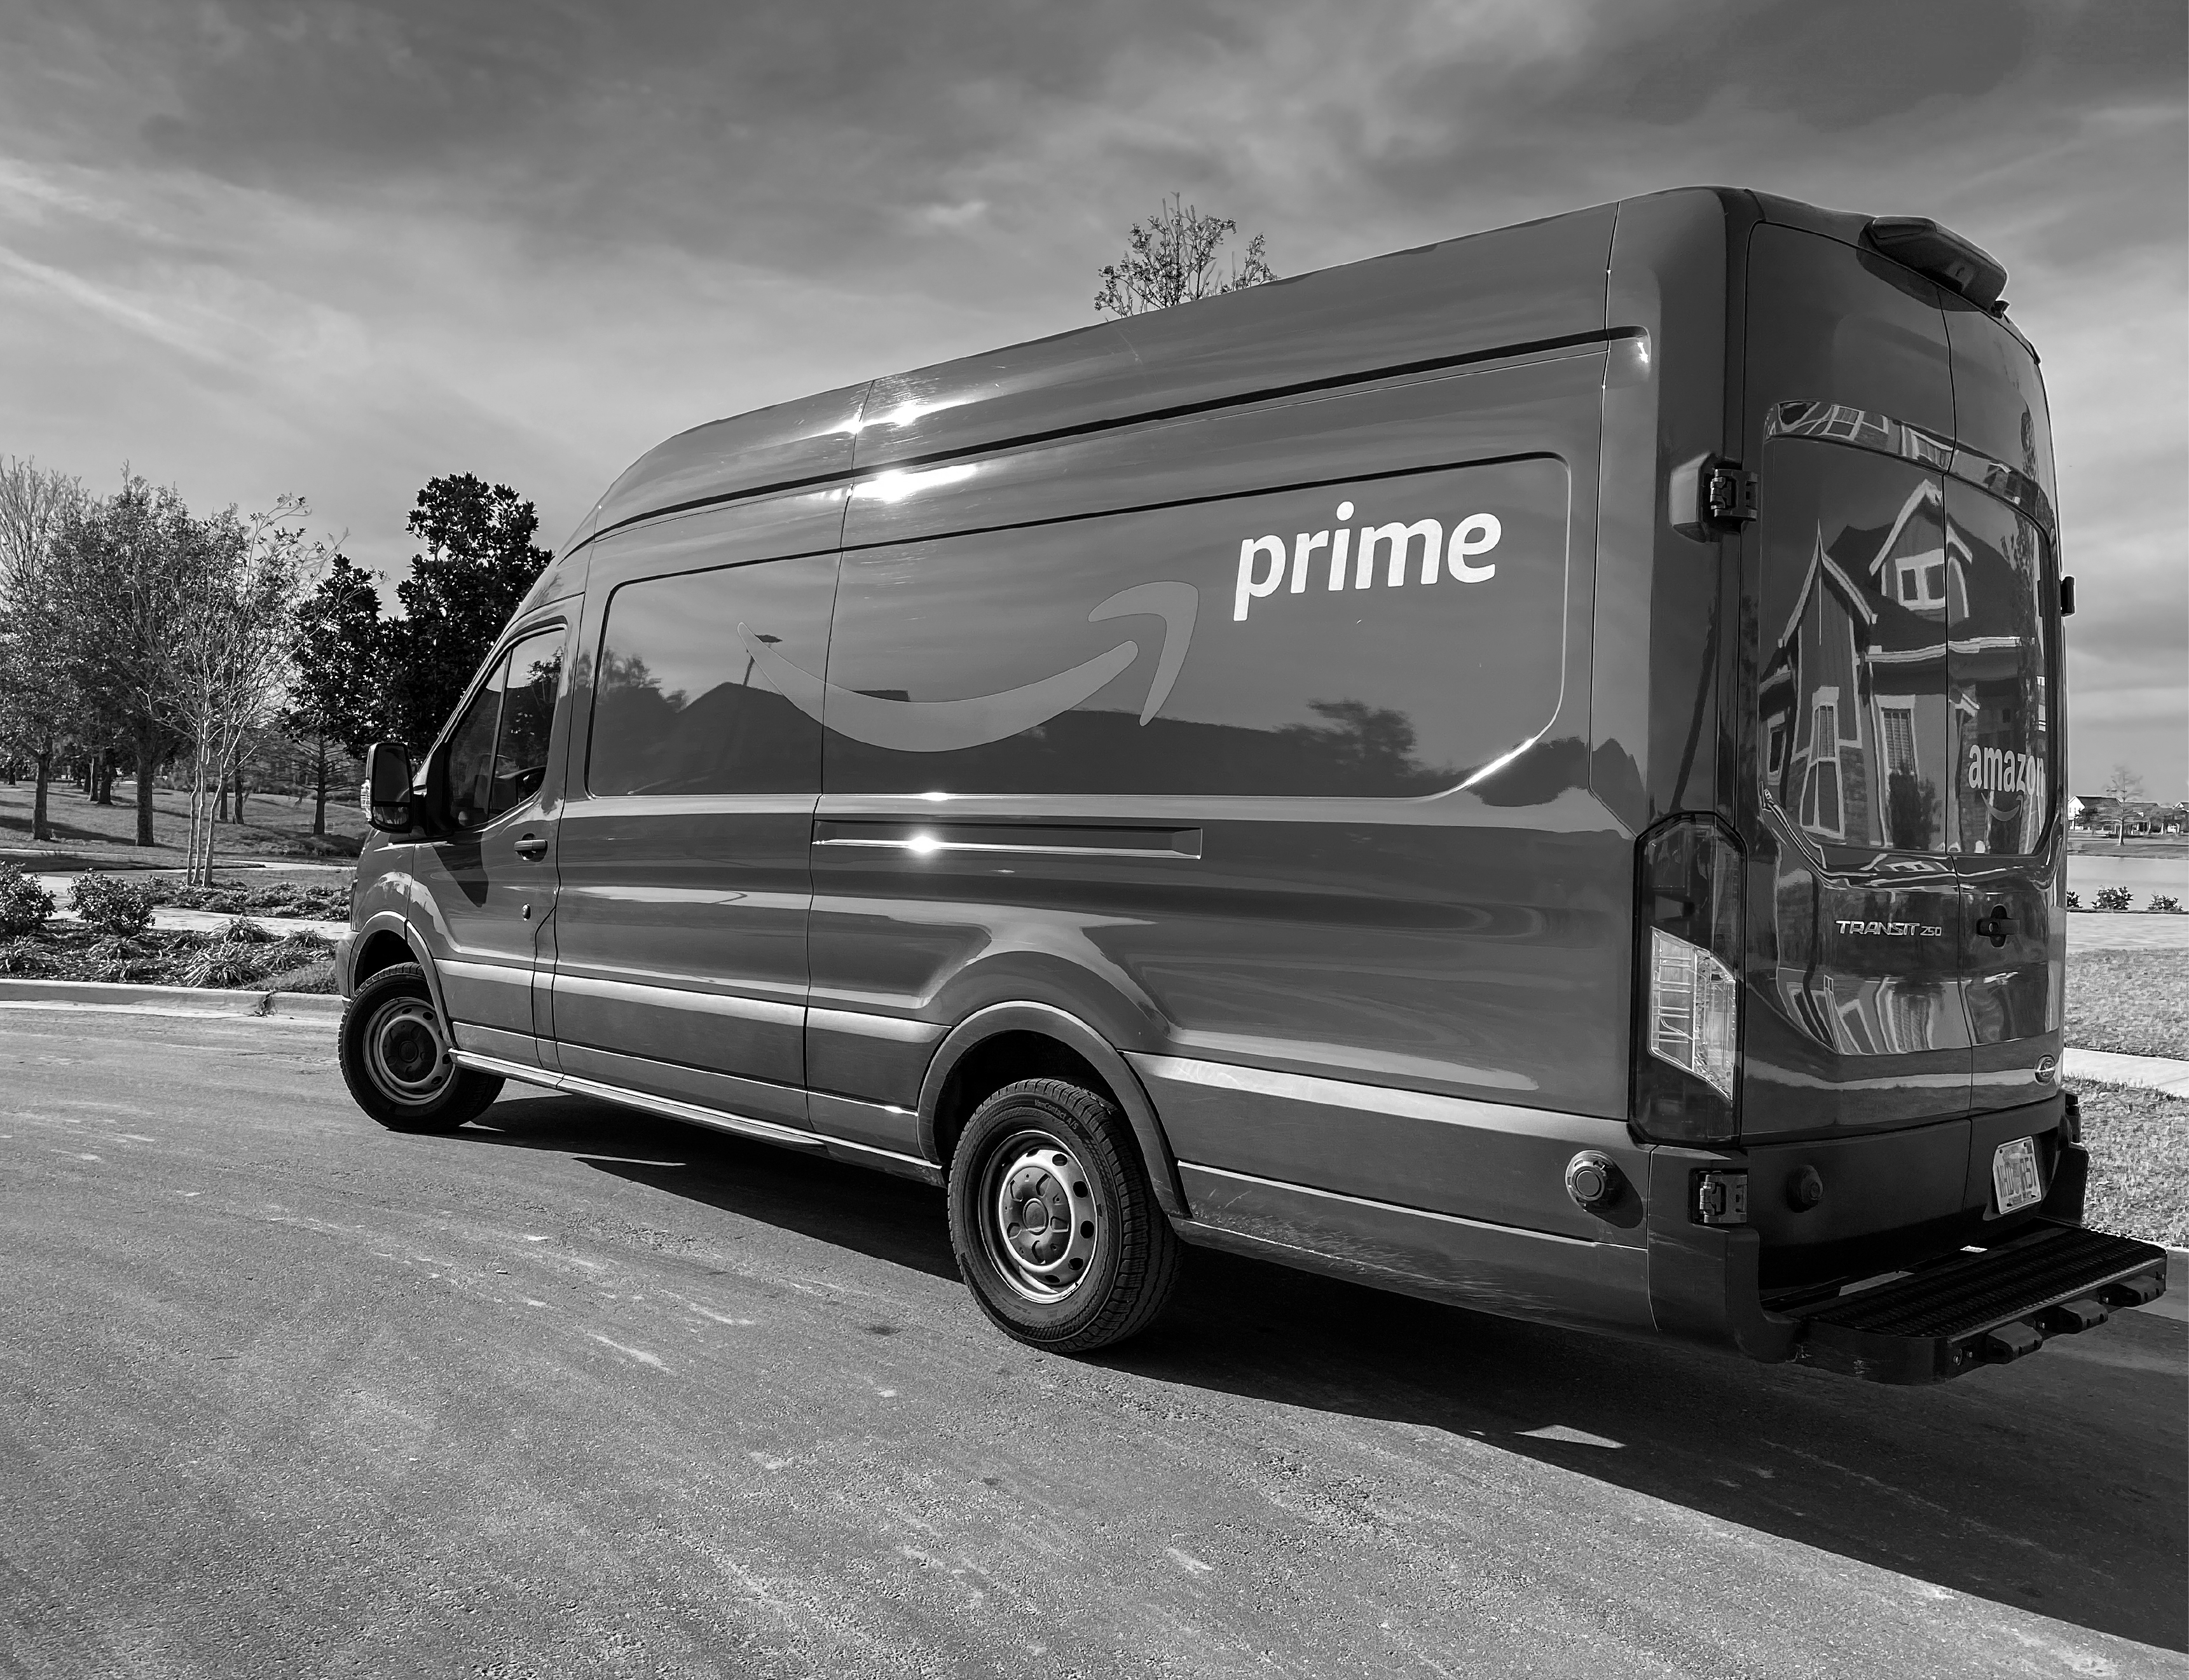 An image of an Amazon delivery truck parked at the end of a cul-de-sac.